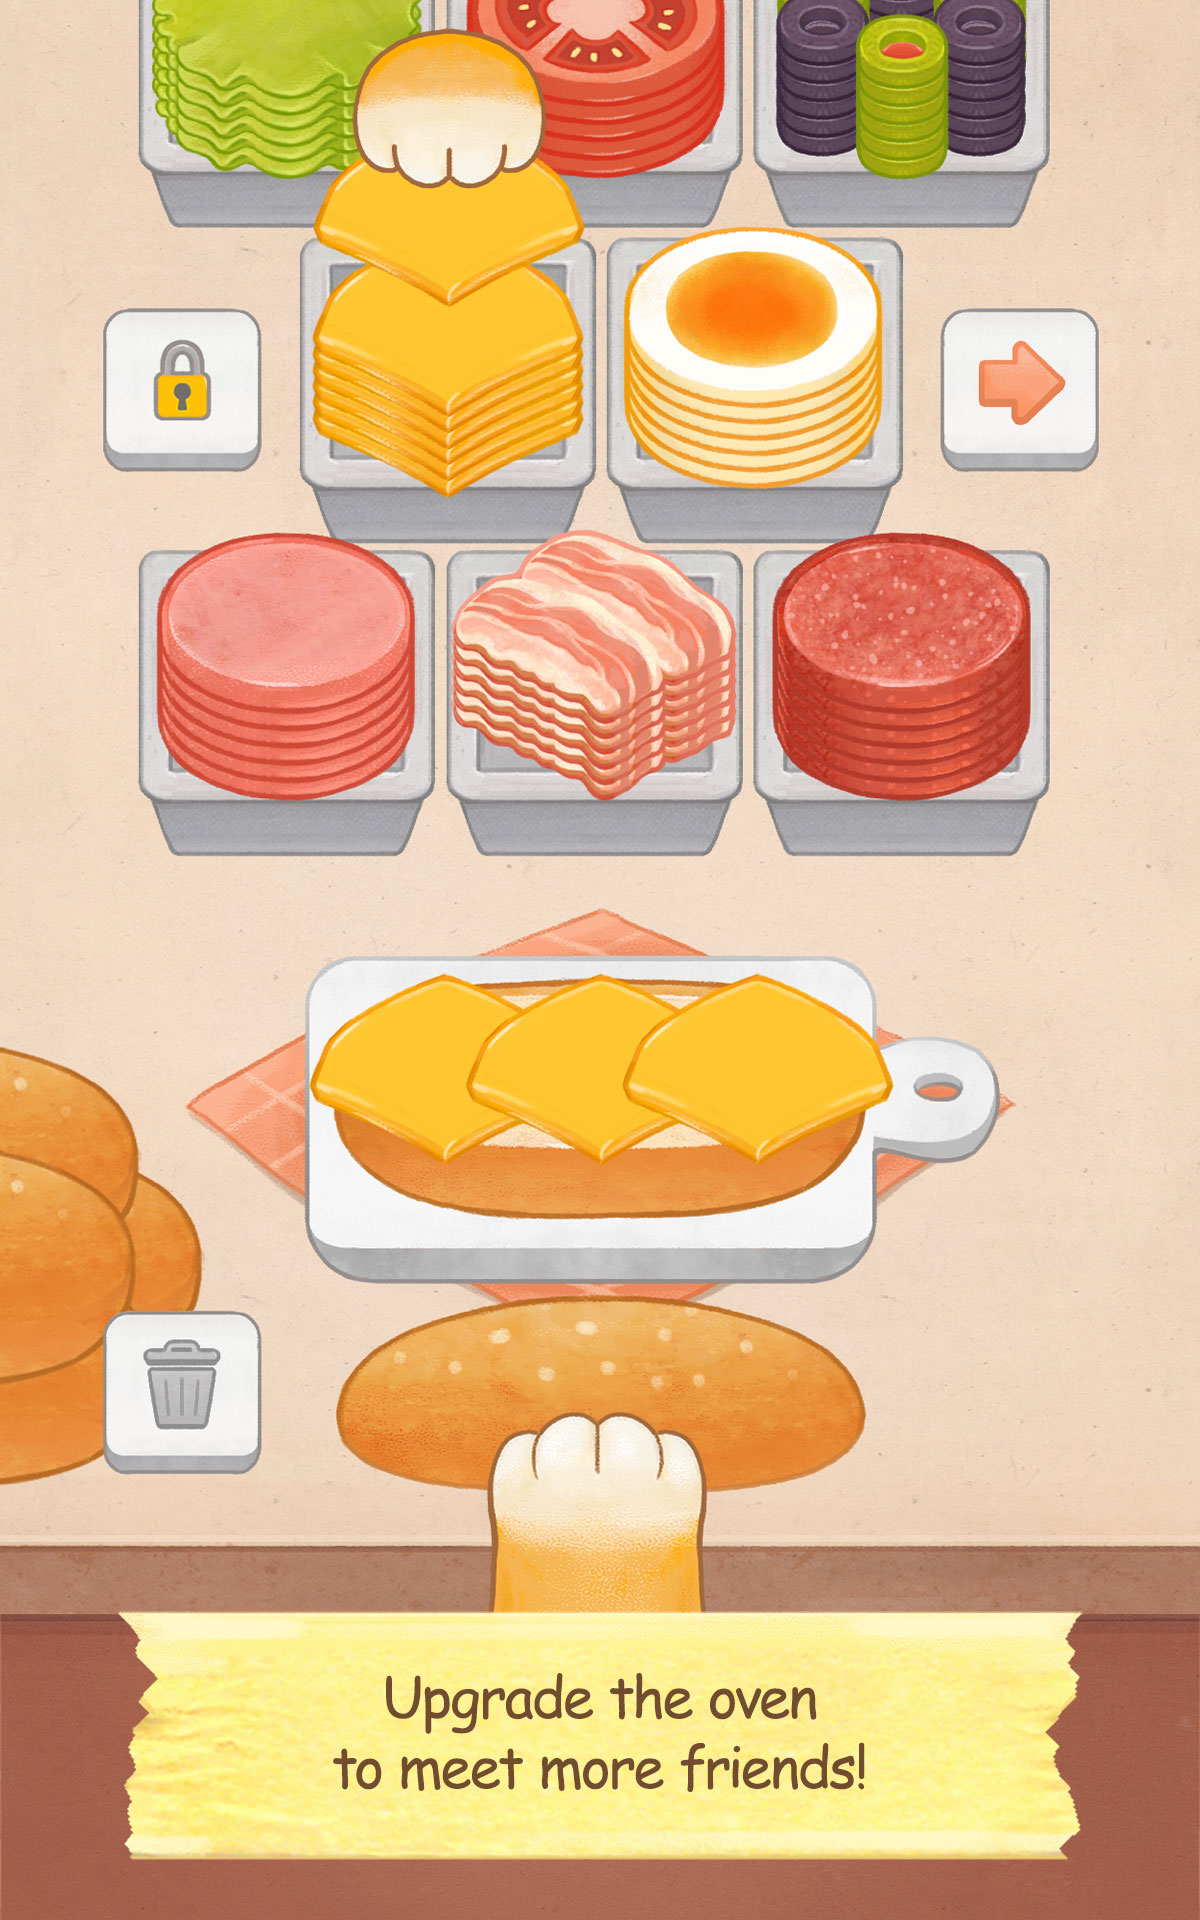 Gameplay of the Cafe Heaven - Cat's Sandwich for Android phone or tablet.